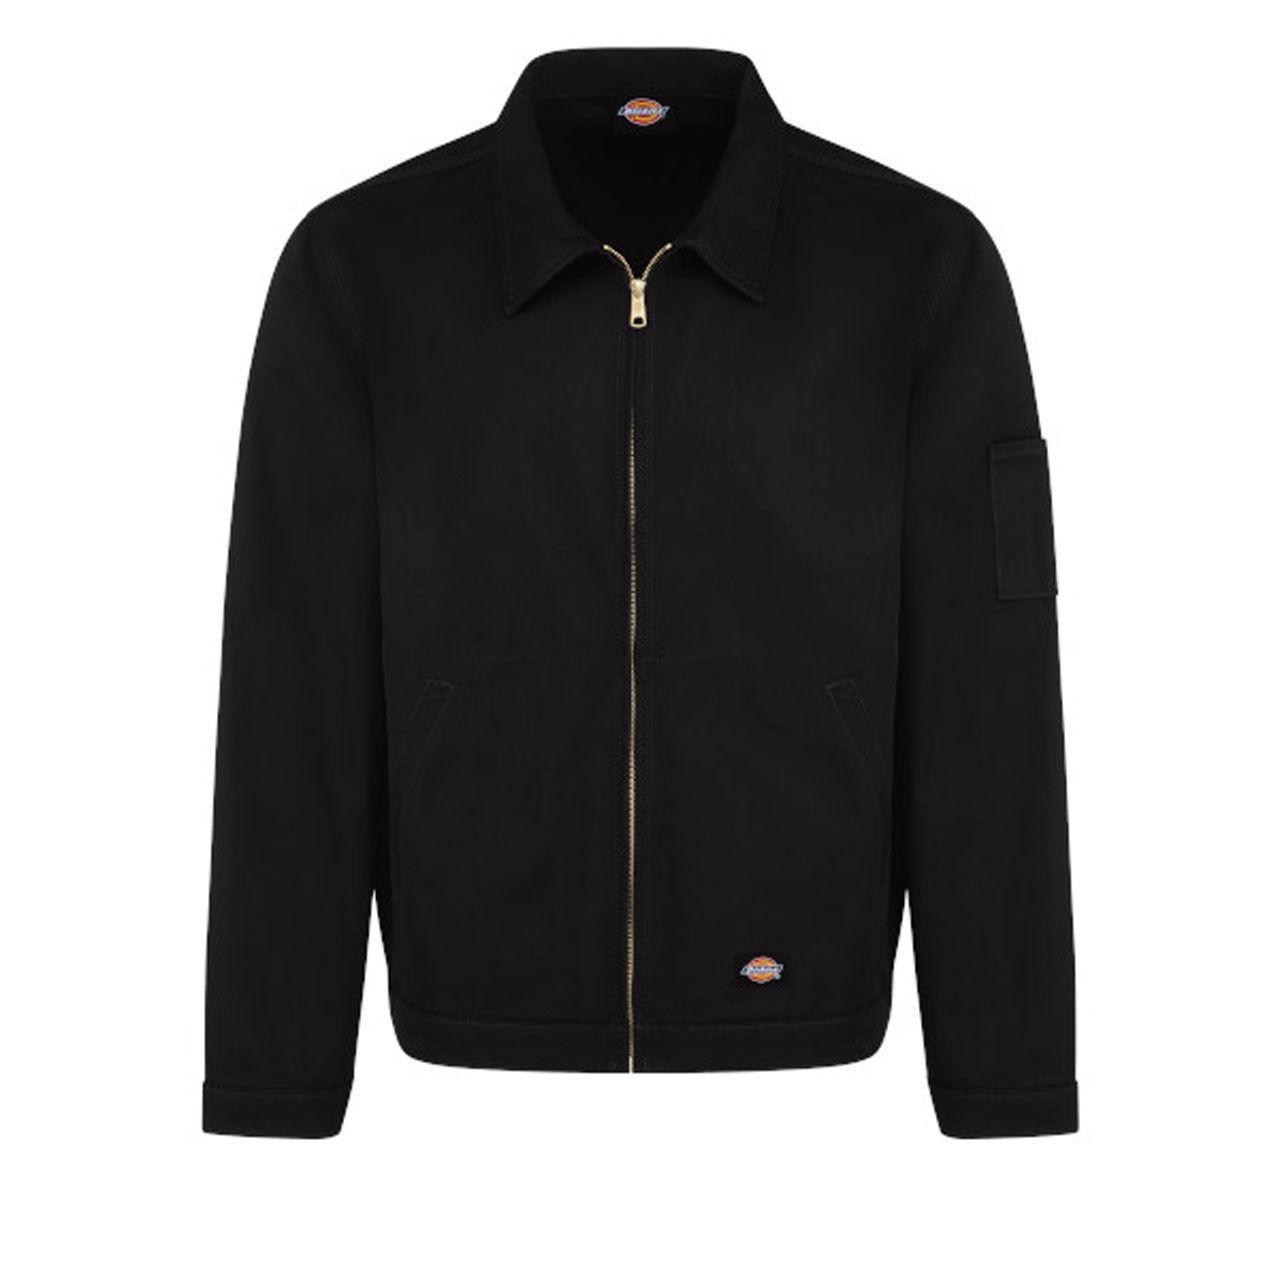 What type of fabric is used in the Dickies Unlined Industrial Eisenhower Jacket?